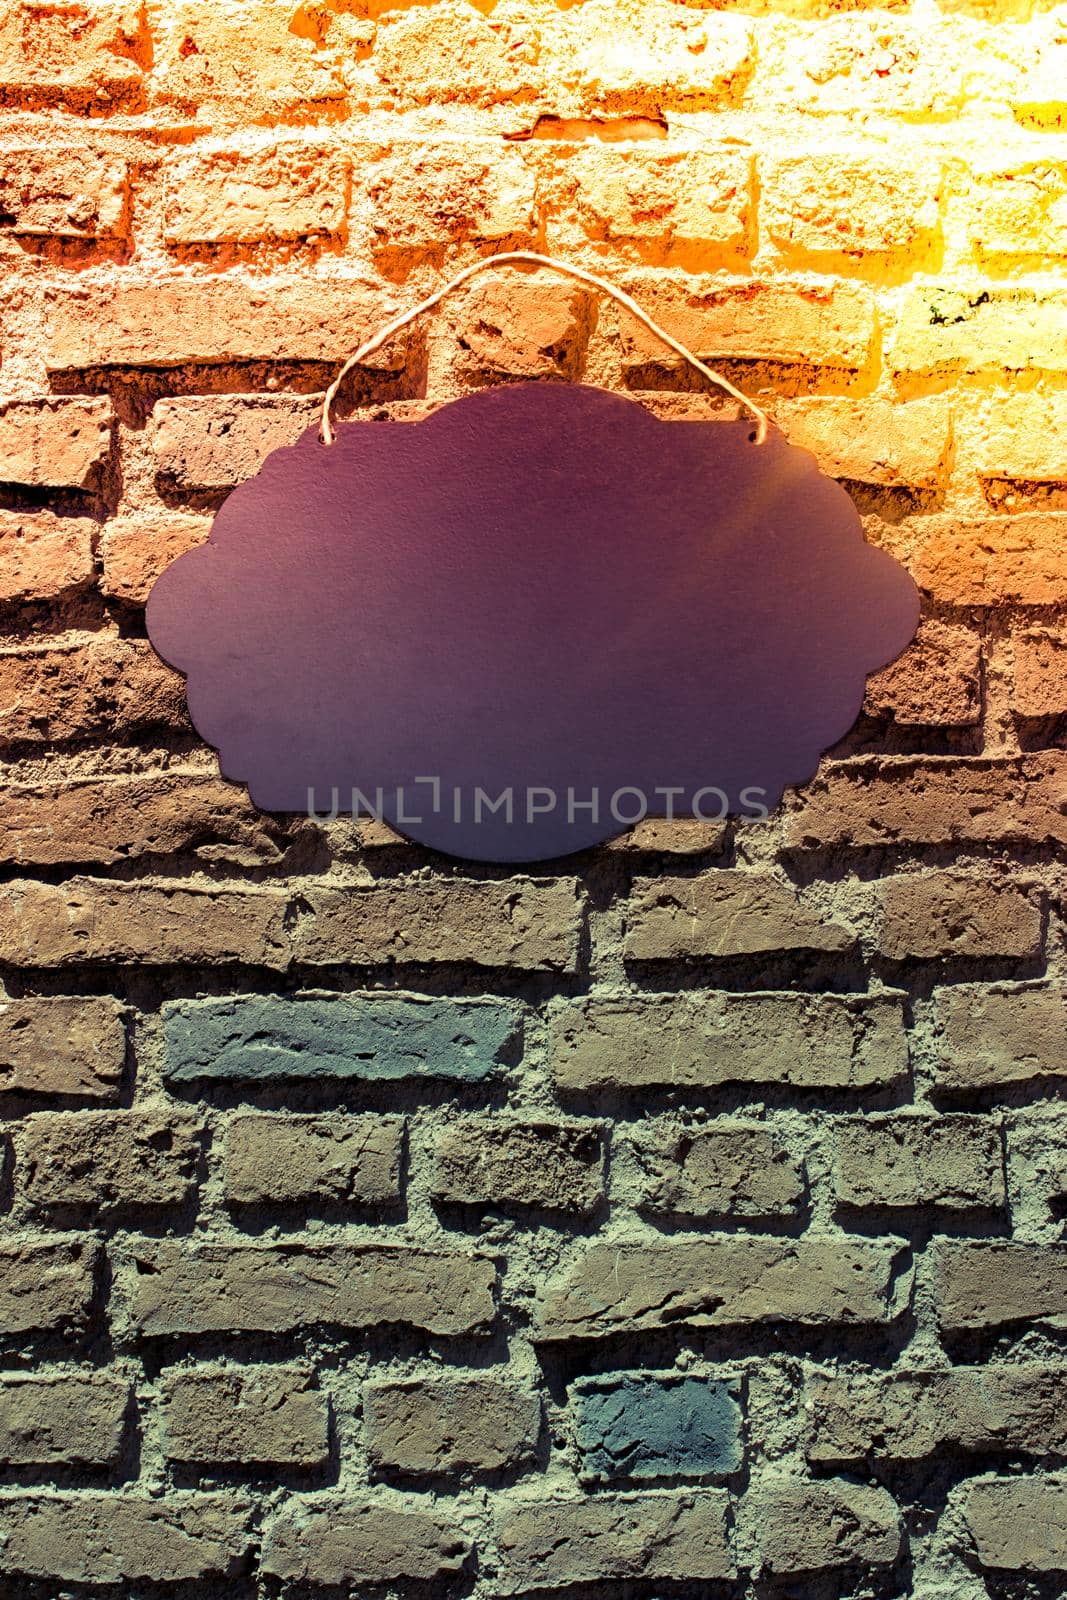 Black Empty Sign Board with string for hanging on wall